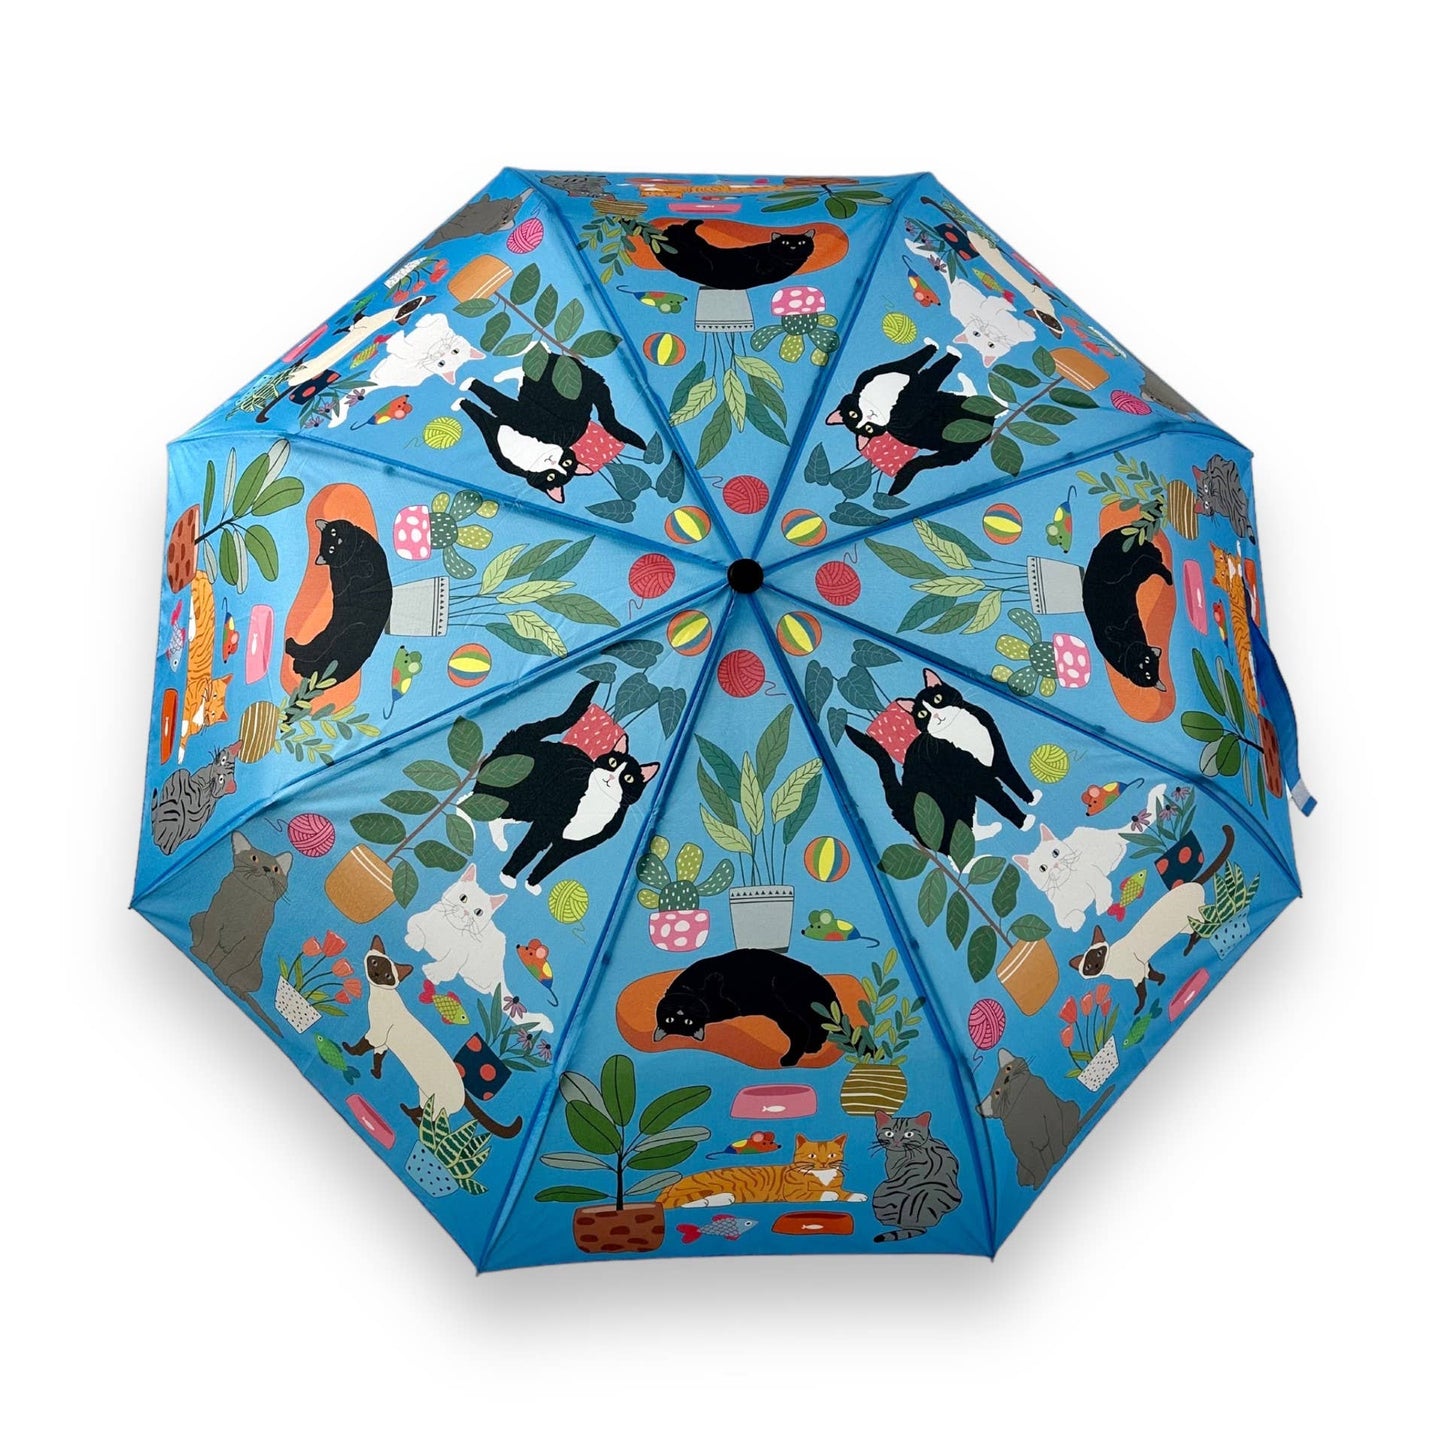 At Home with Cats Umbrella